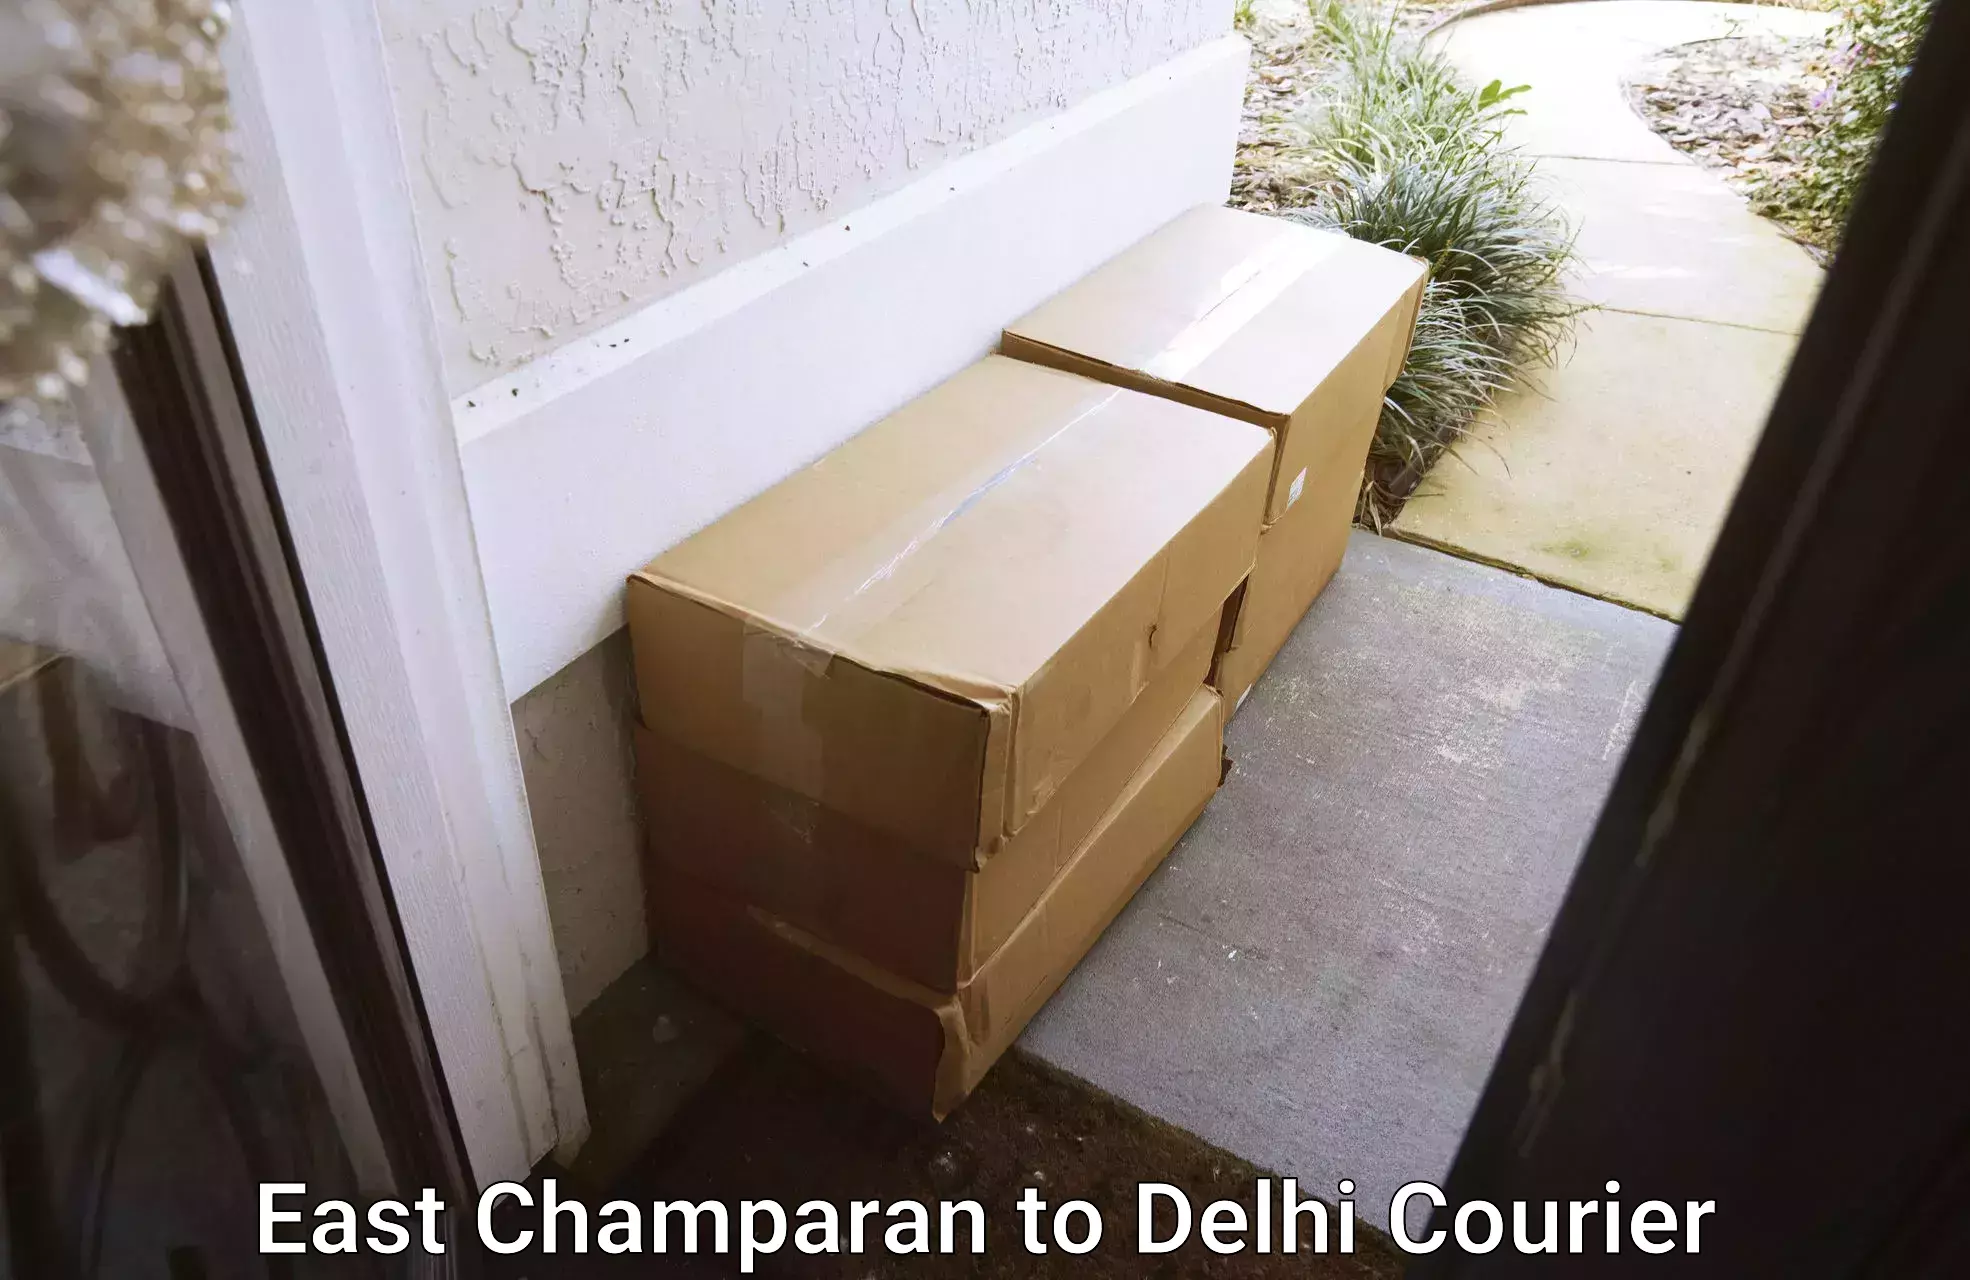 Quality relocation assistance East Champaran to Jawaharlal Nehru University New Delhi